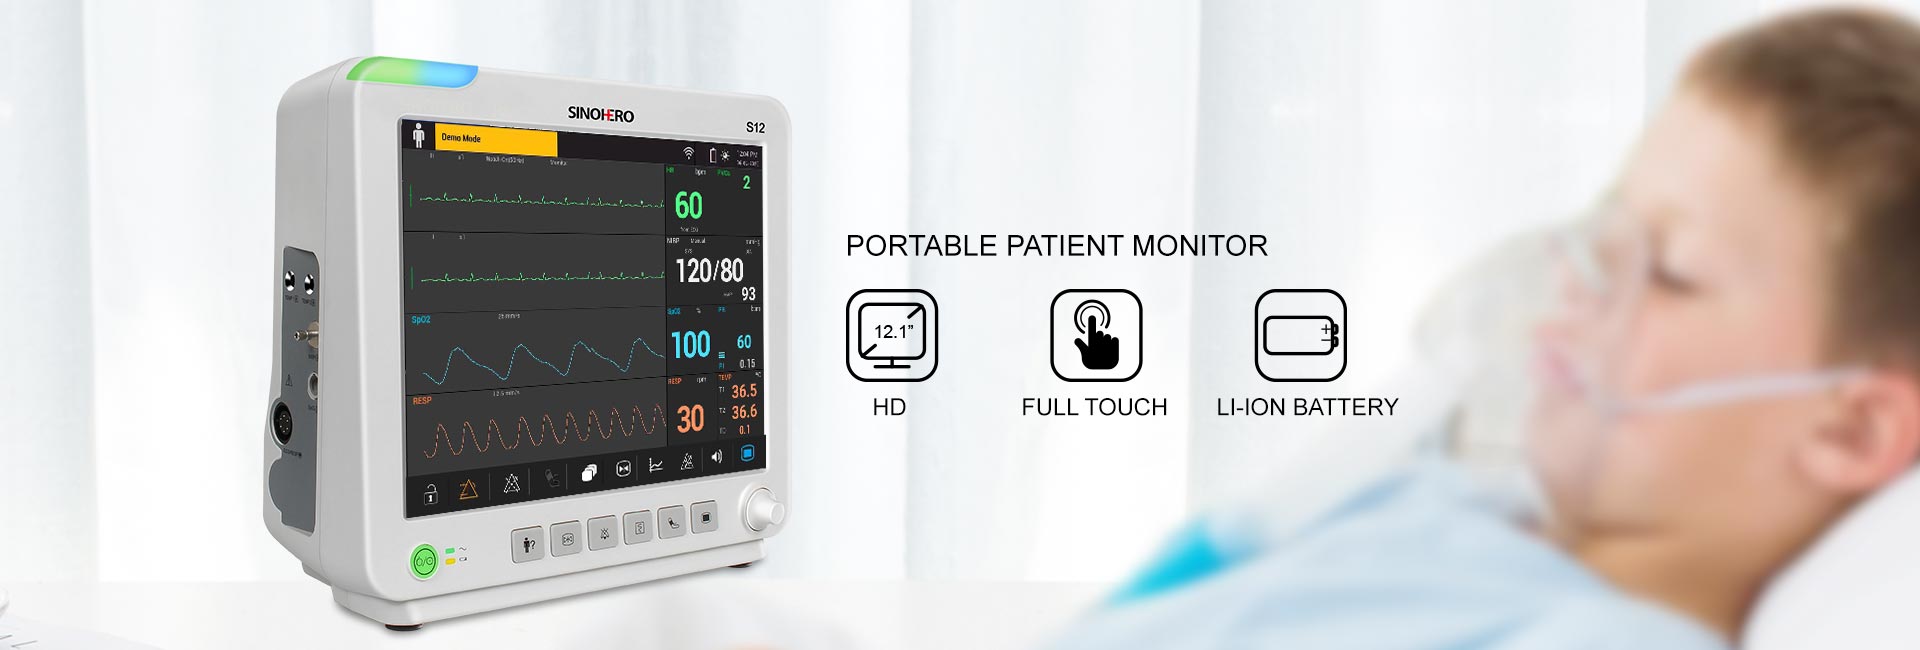 S12 12.1 Portable Patient Monitor(图3)